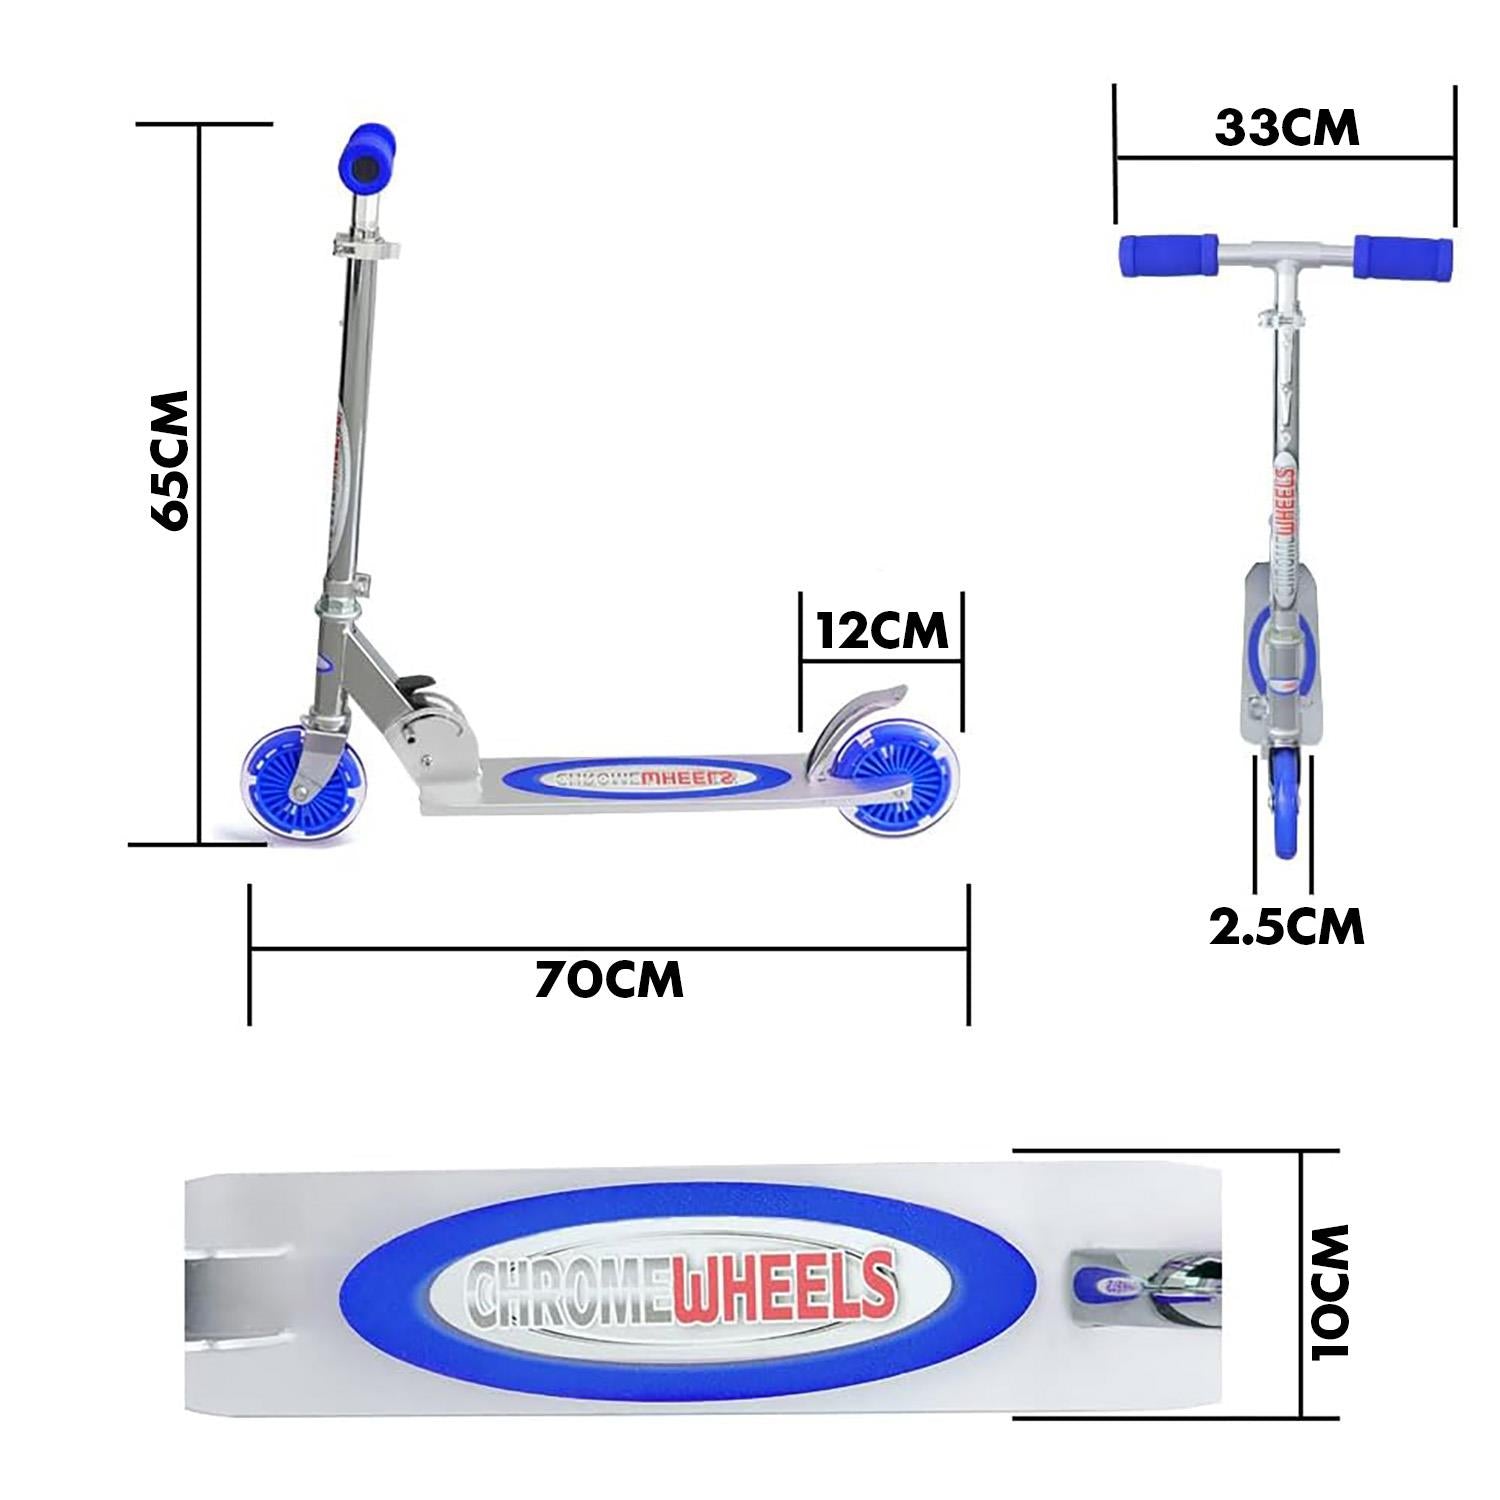 Foldable Kids Scooter Blue by The Magic Toy Shop - UKBuyZone